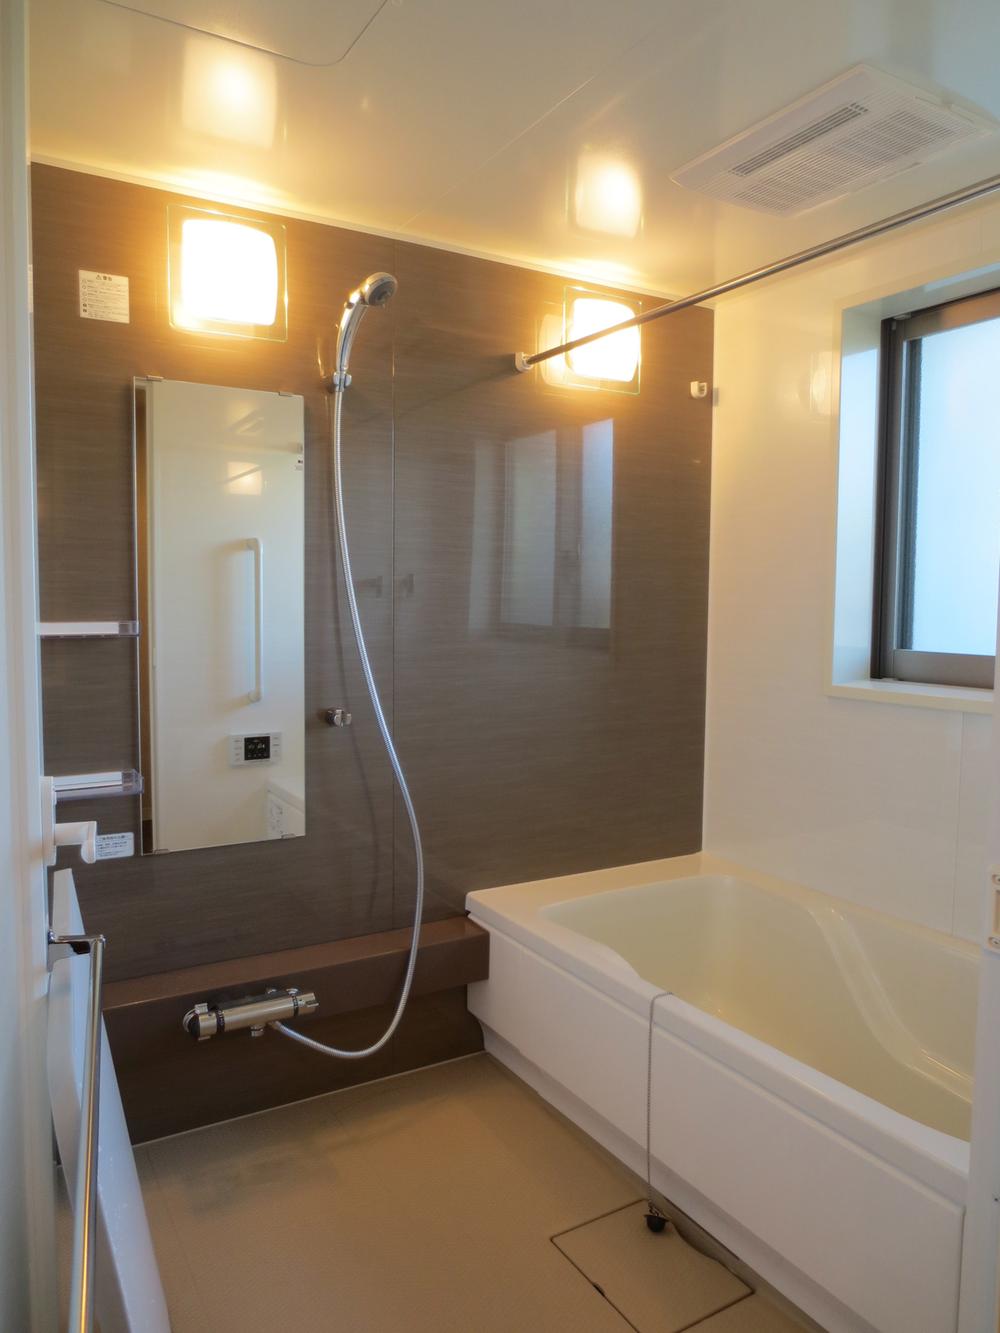 Bathroom. The bathrooms are spacious 1620 type. With bathroom dryer, It is also useful to your laundry on a rainy day.